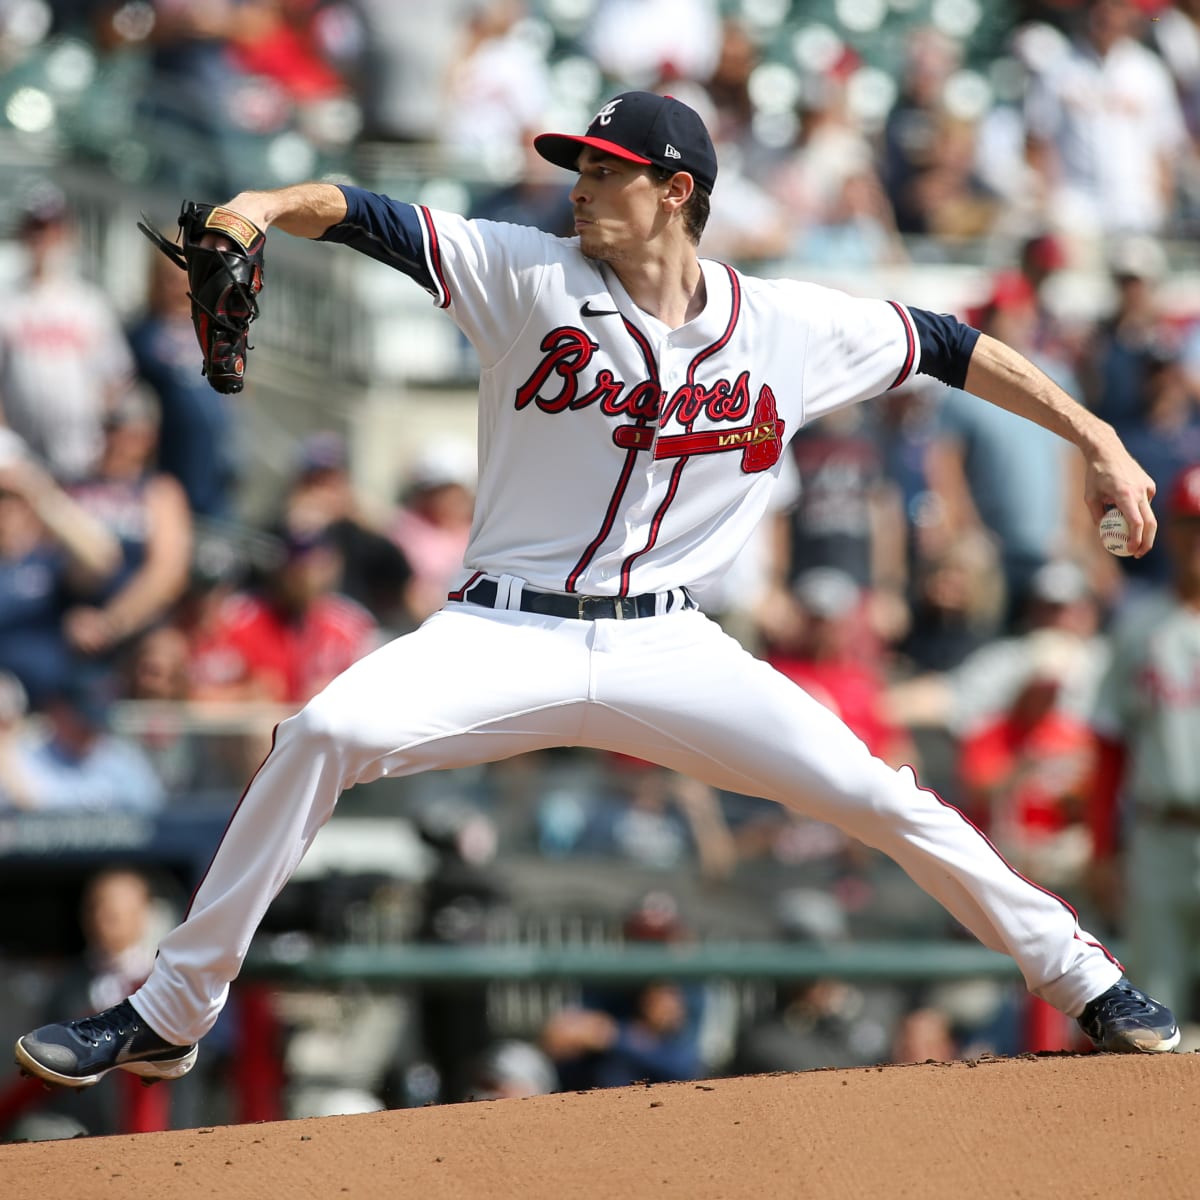 Max Fried is rejoining the Braves' rotation after being sidelined